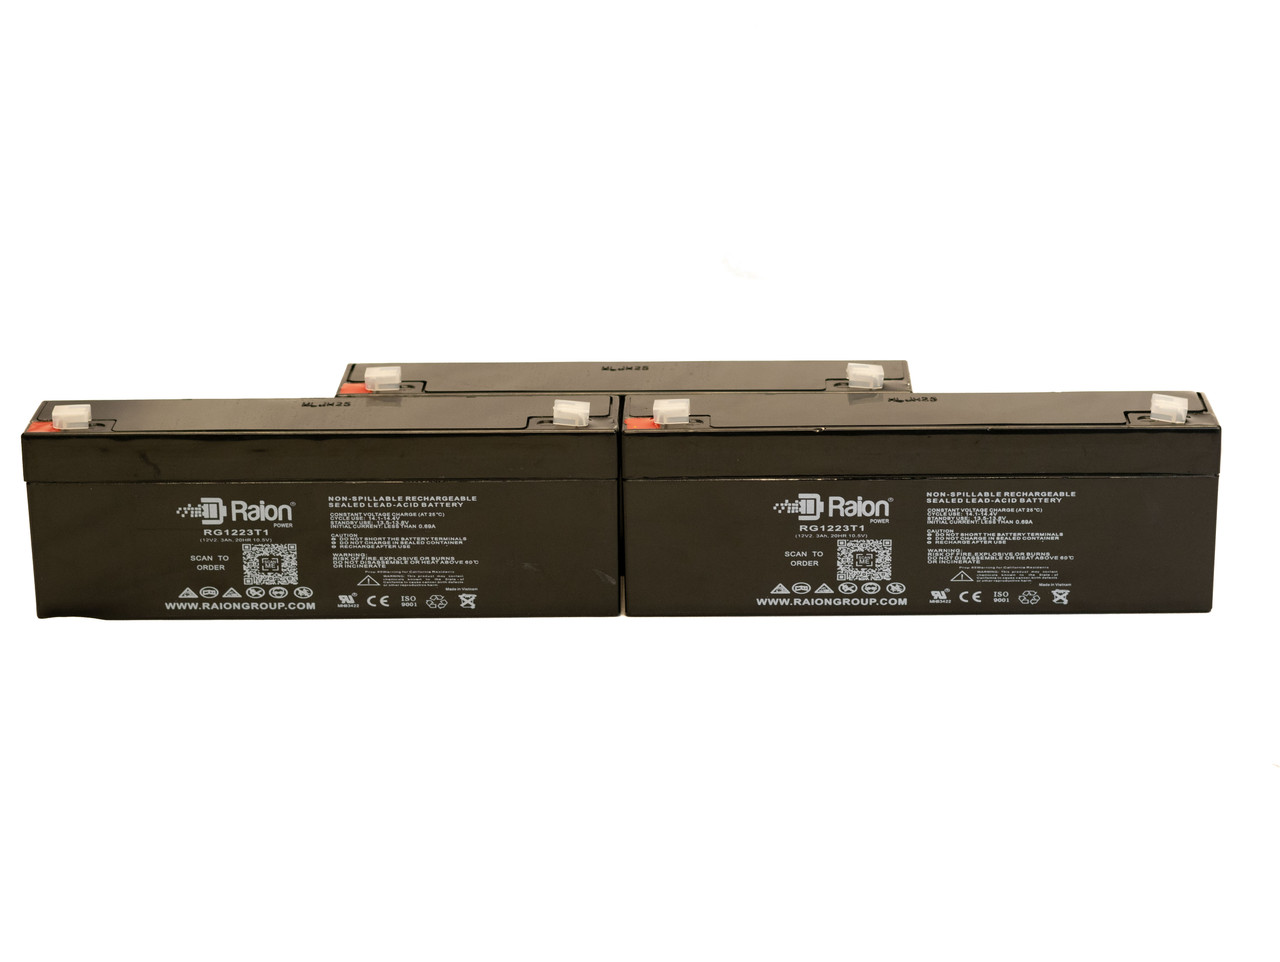 Raion Power 12V 2.3Ah RG1223T1 Replacement Medical Battery for Hoyer RPA600 Patient Lift - 3 Pack